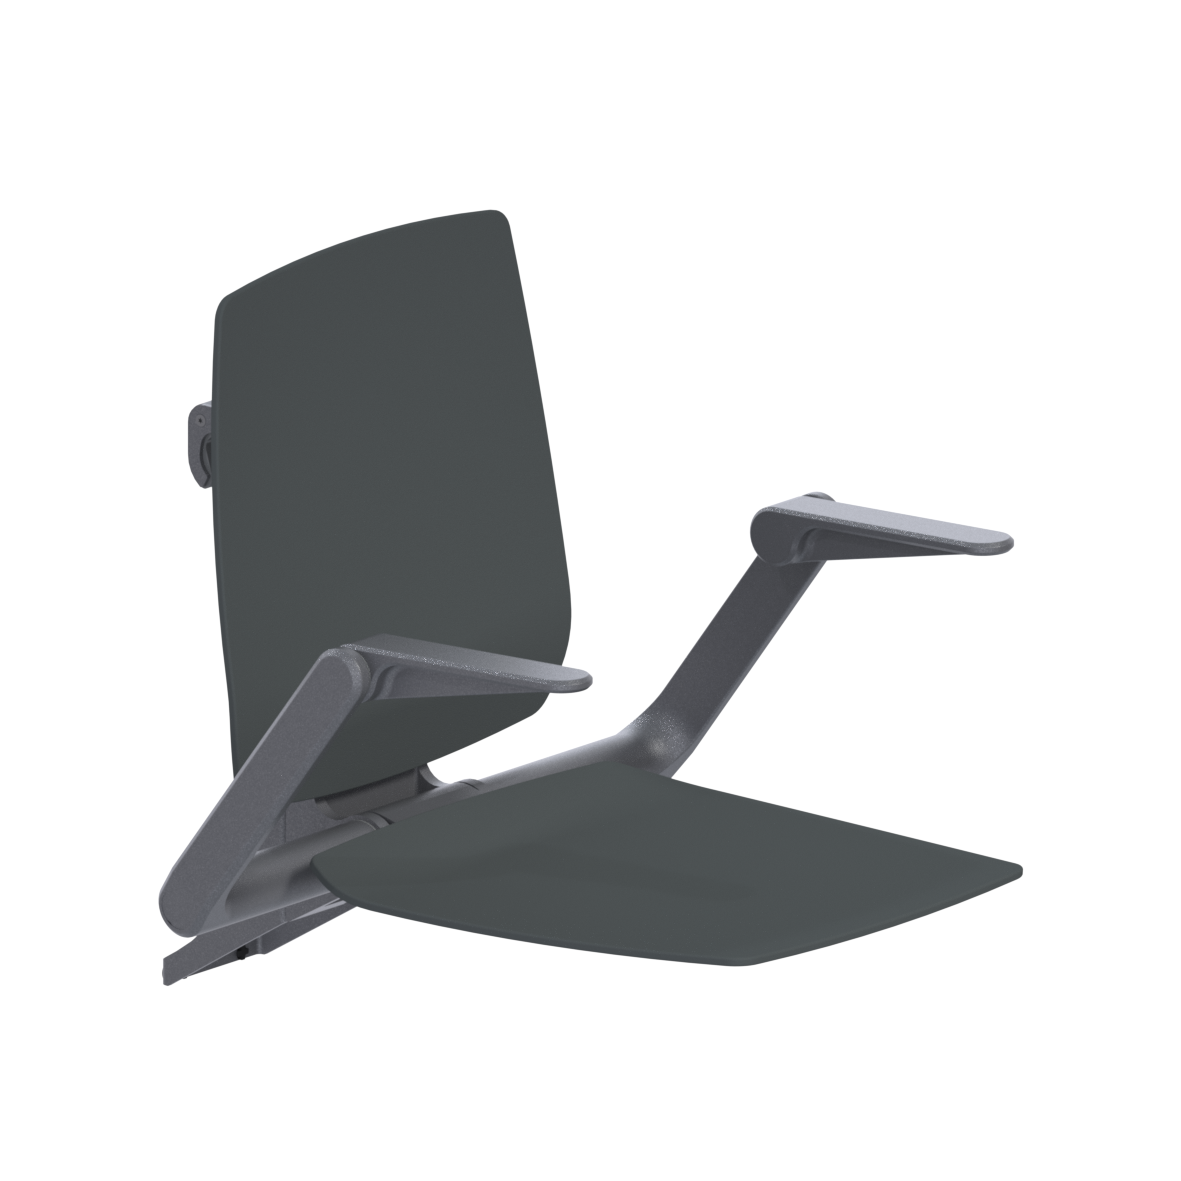 Ascento Hanging seat CH, with backrest and armrests, for Cavere Care, 584 x 640 x 574 mm, Ascento Dark grey